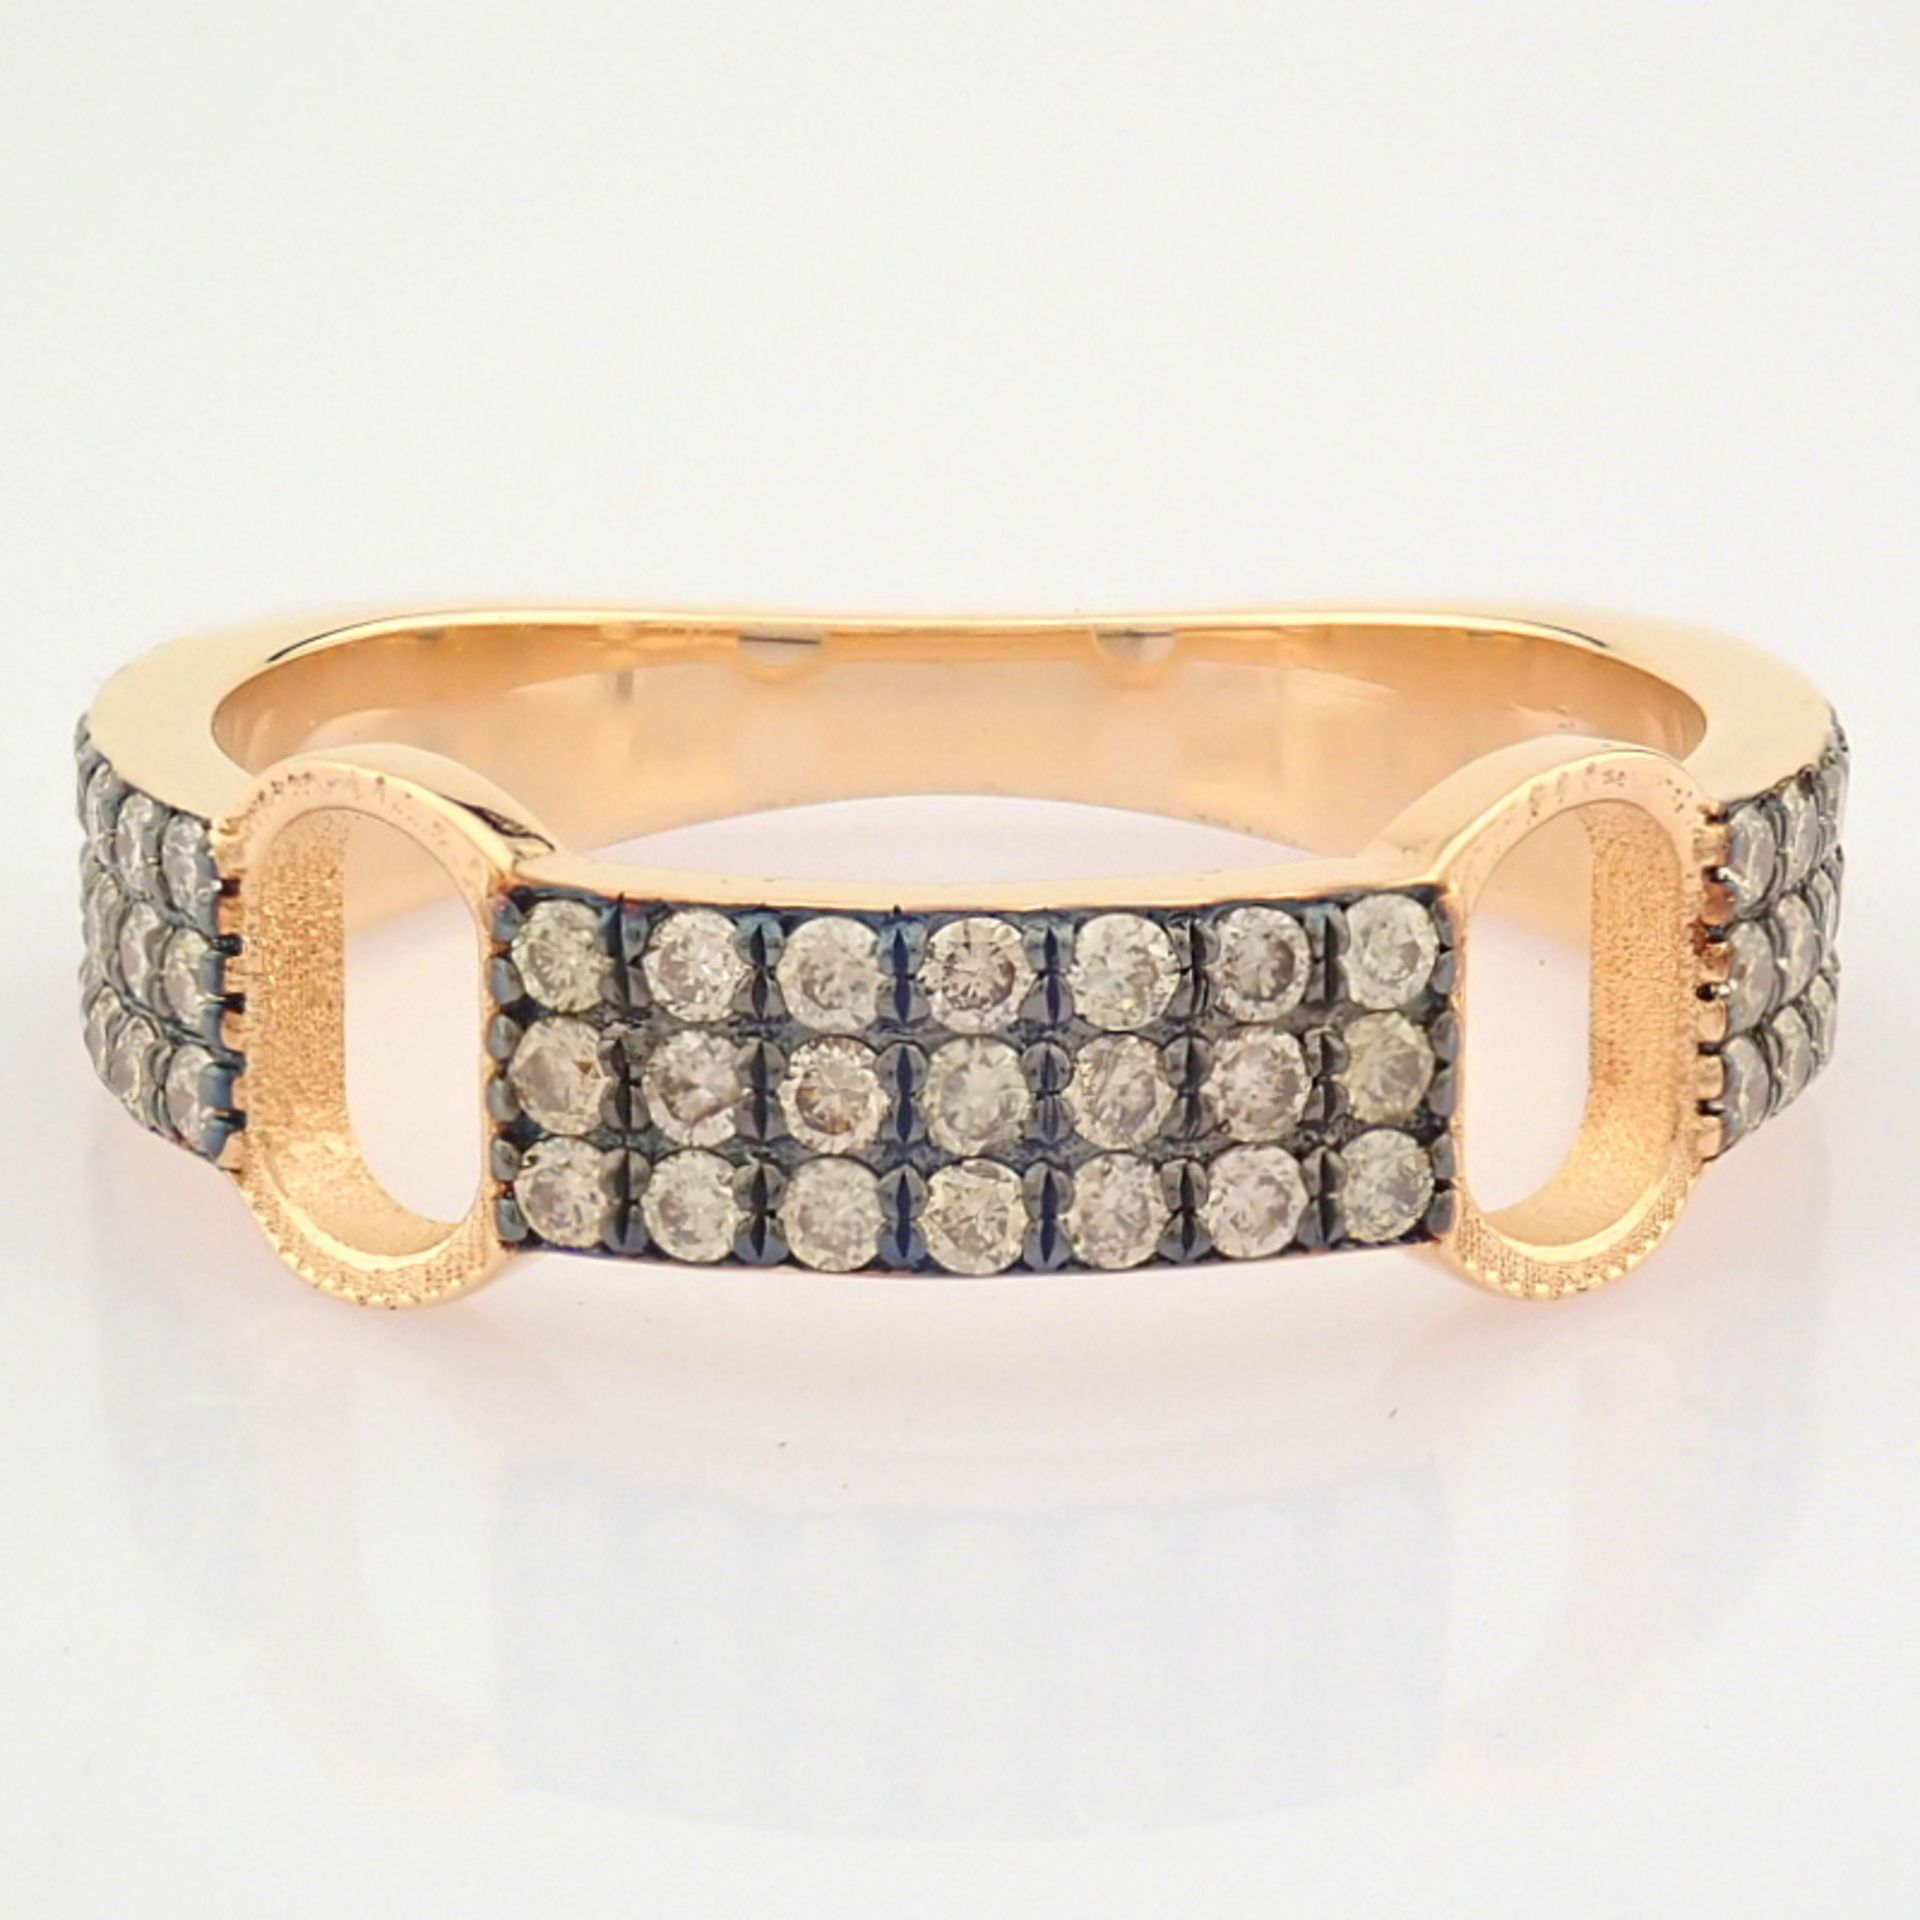 Certificated 14K Rose/Pink Gold Brown Diamond Ring (Total 0.52 ct Stone) - Image 3 of 5